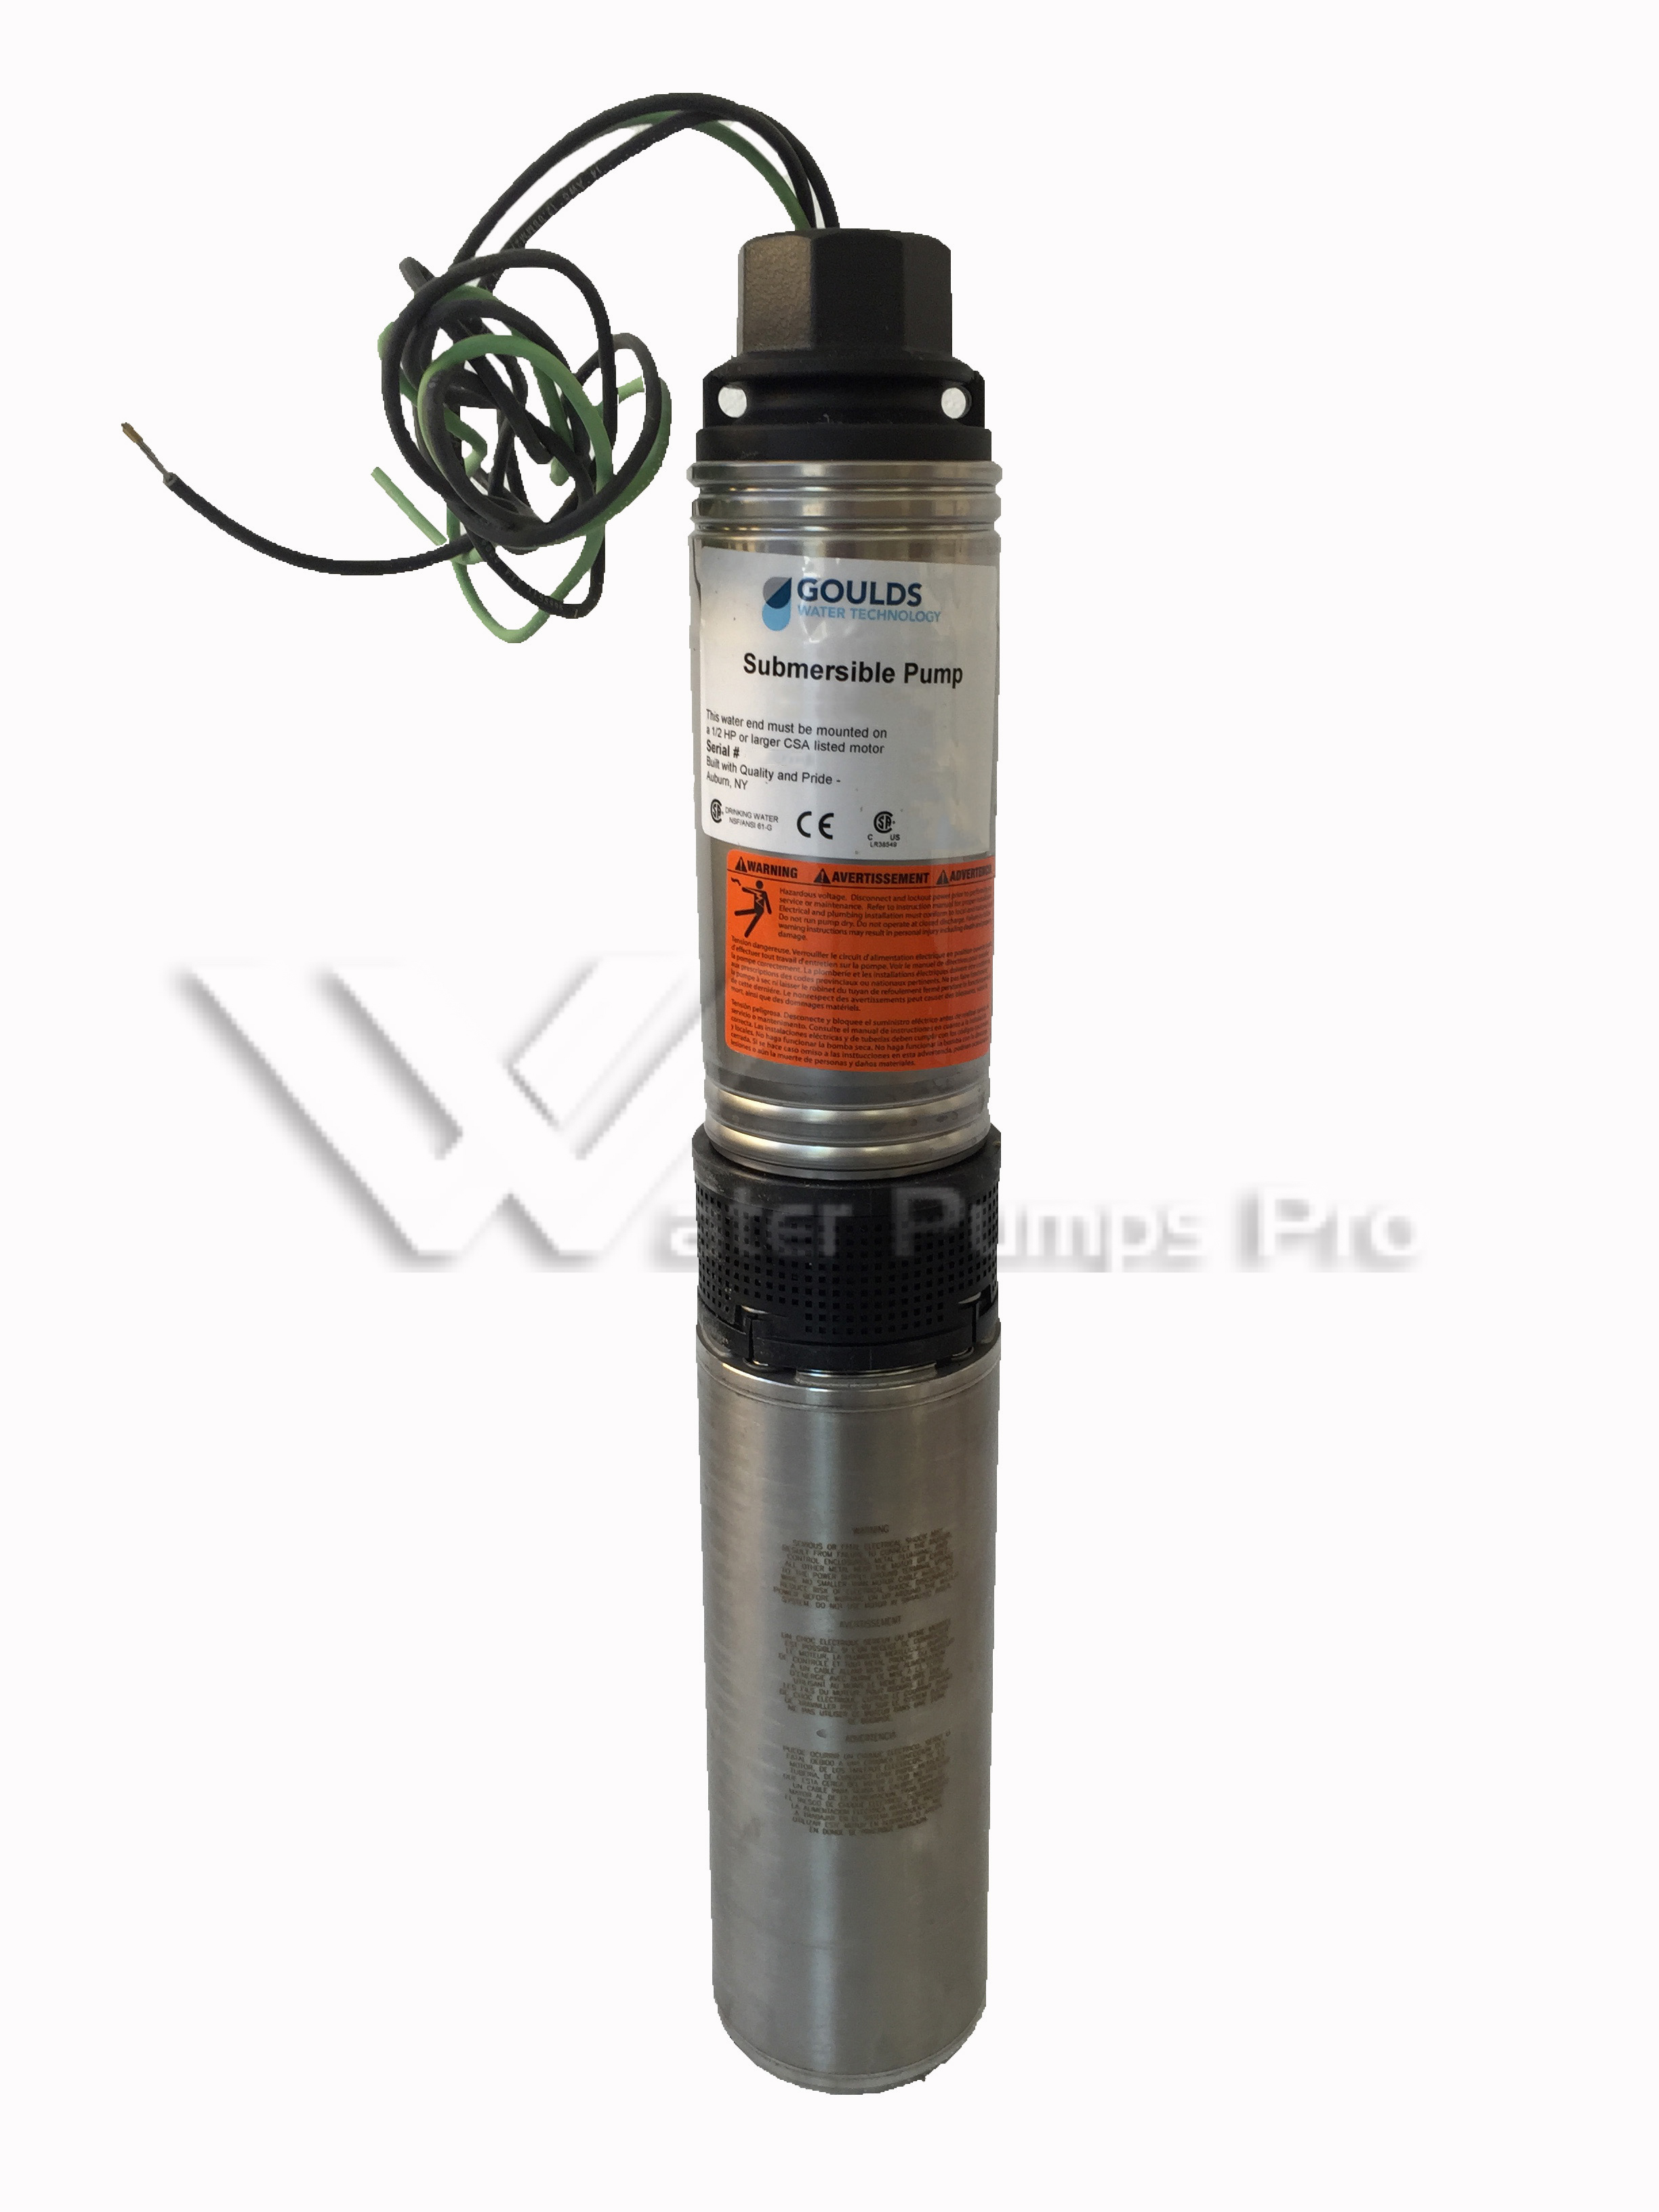 Goulds 10HS07422C Submersible Water Well Pump 3/4HP 230V 2Wire